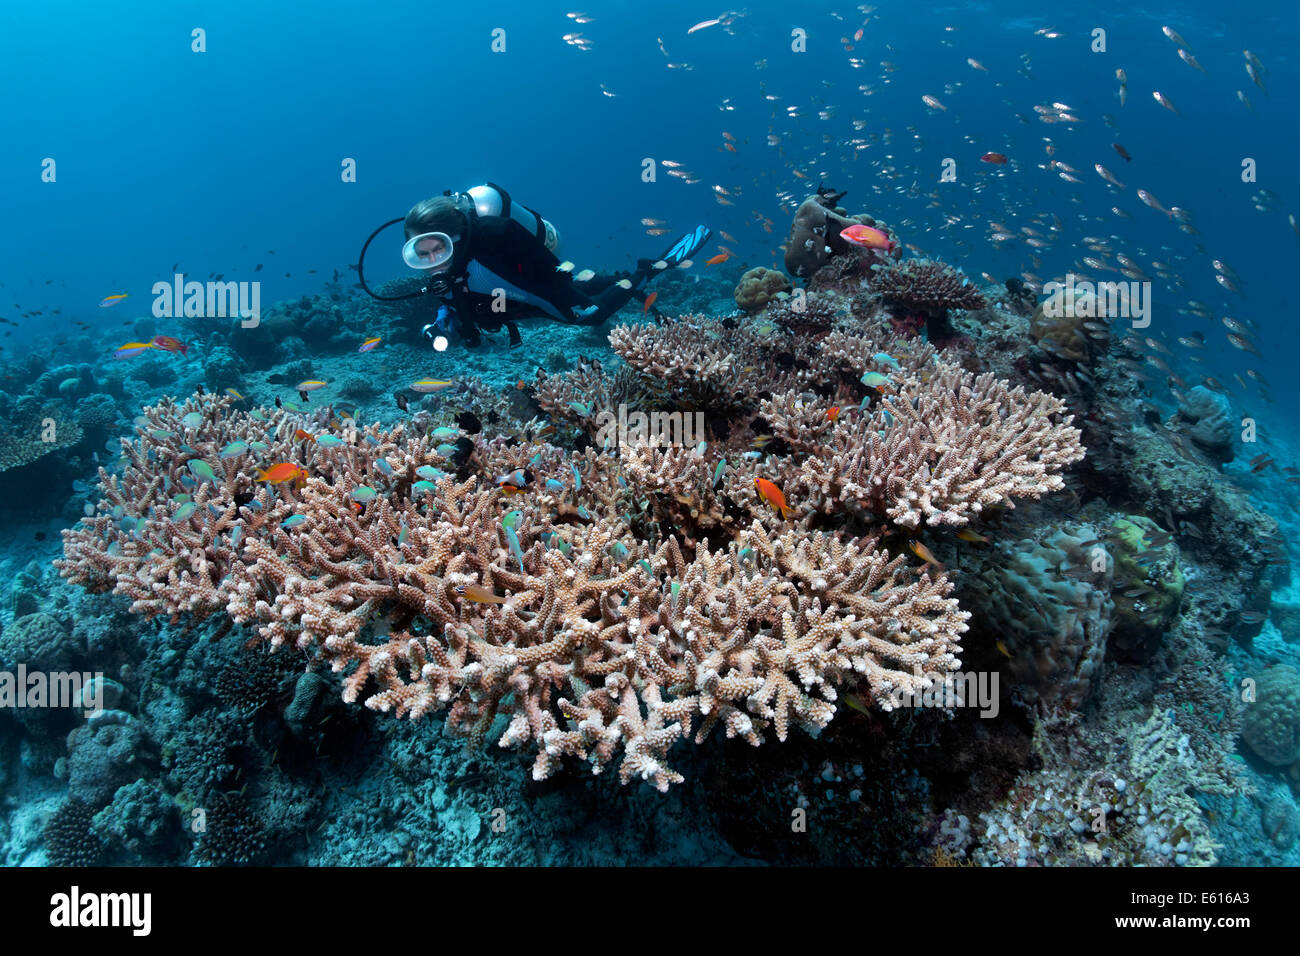 Scuba diver at a coral reef, looking at Acropora Coral or Staghorn Coral (Acropora sp.), stone coral, various coral fish Stock Photo